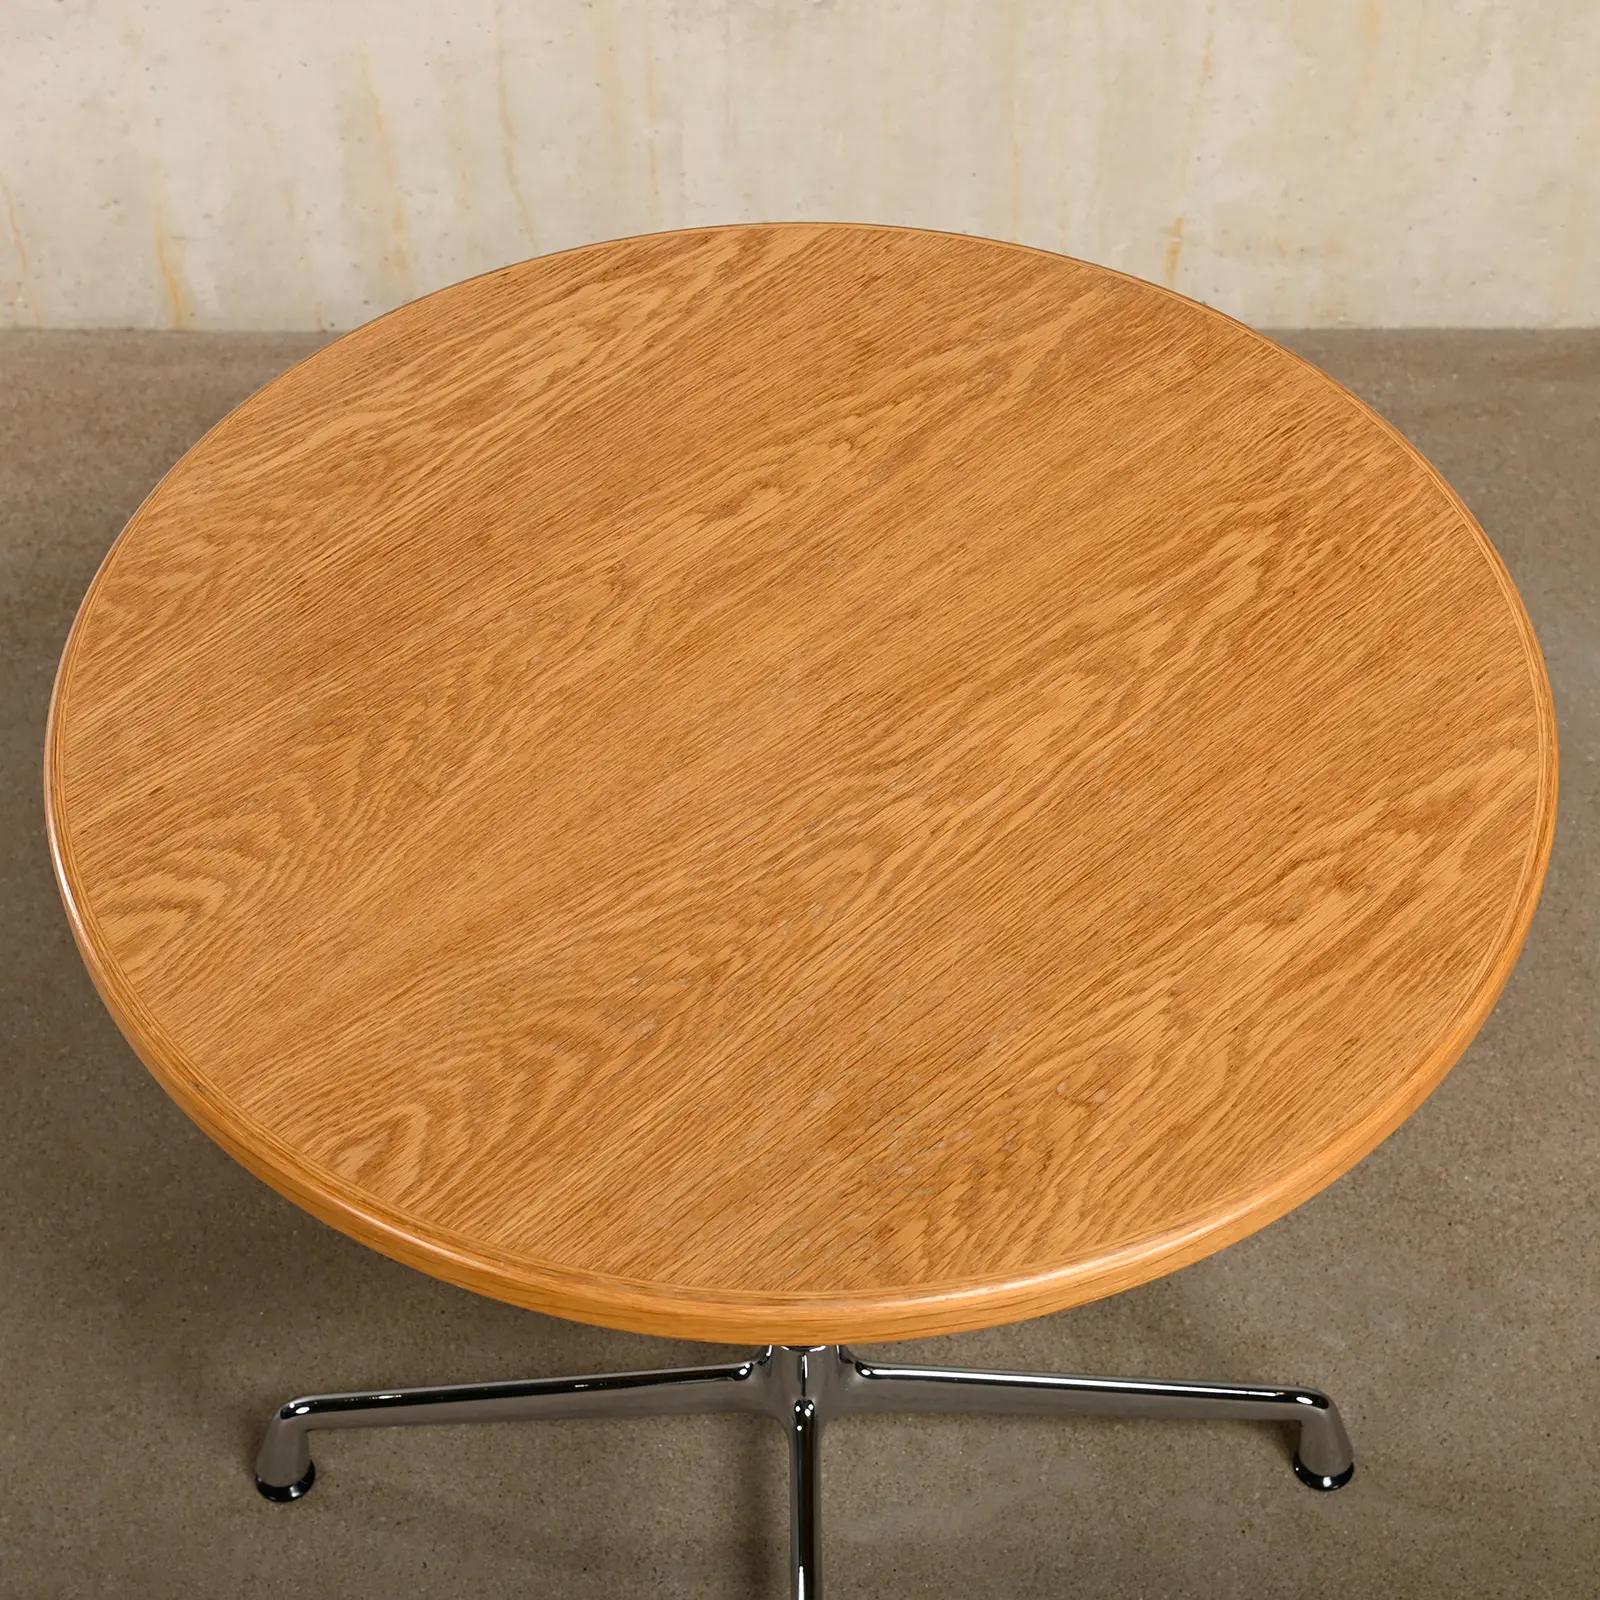 German Charles & Ray Eames Contract Table Oak veneer for Vitra